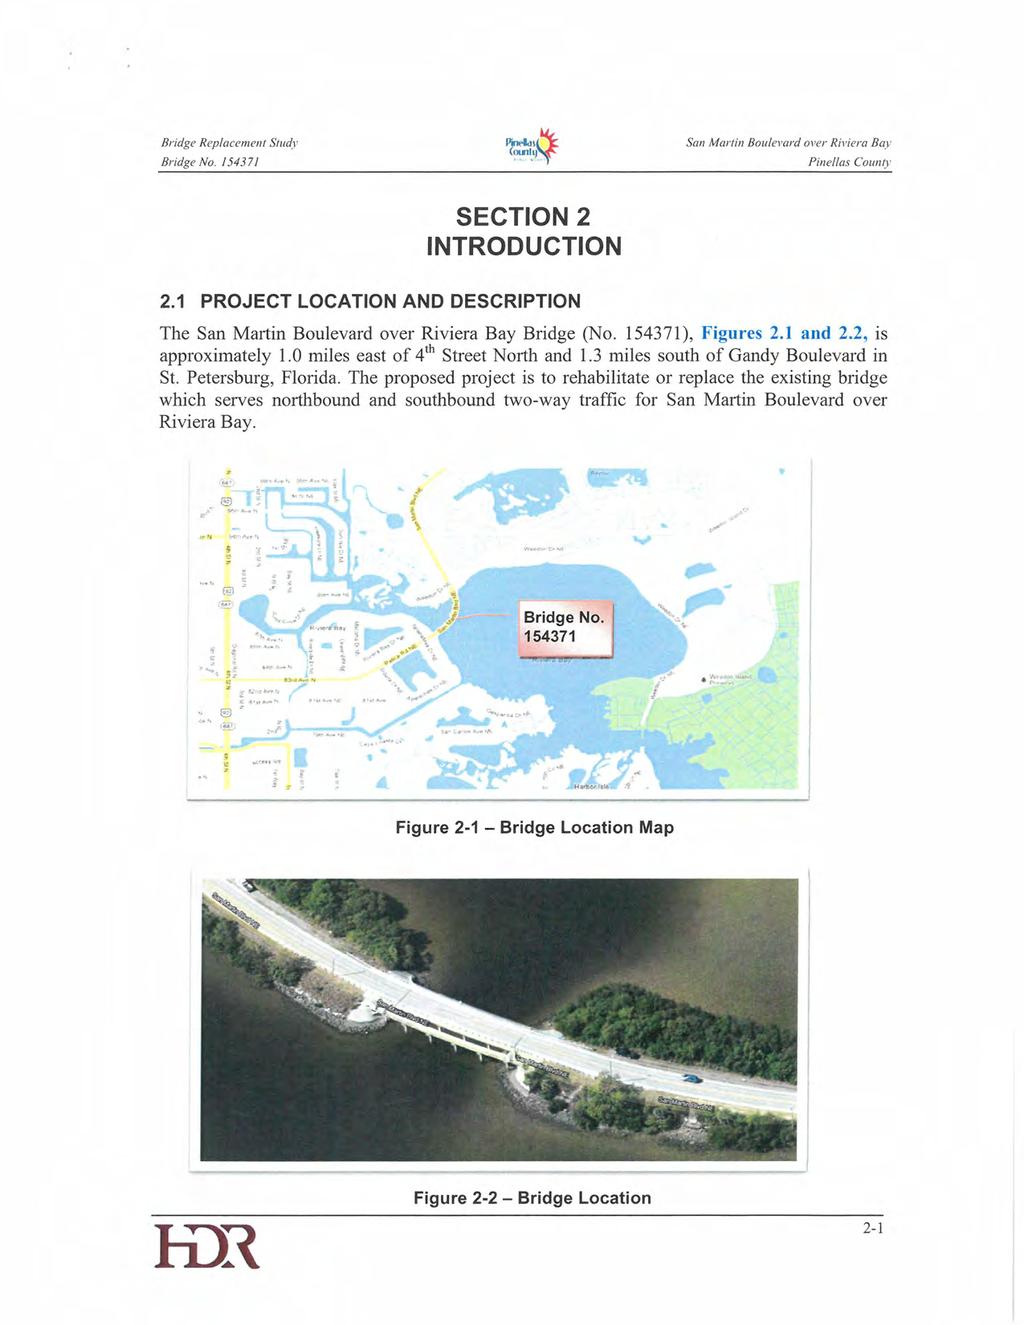 Bridge No. 1543 71 SECTION 2 INTRODUCTION 2.1 PROJECT LOCATION AND DESCRIPTION The Bridge (No. 154371), Figures 2.1 and 2.2, is approximately 1.0 miles east of 4th Street North and 1.